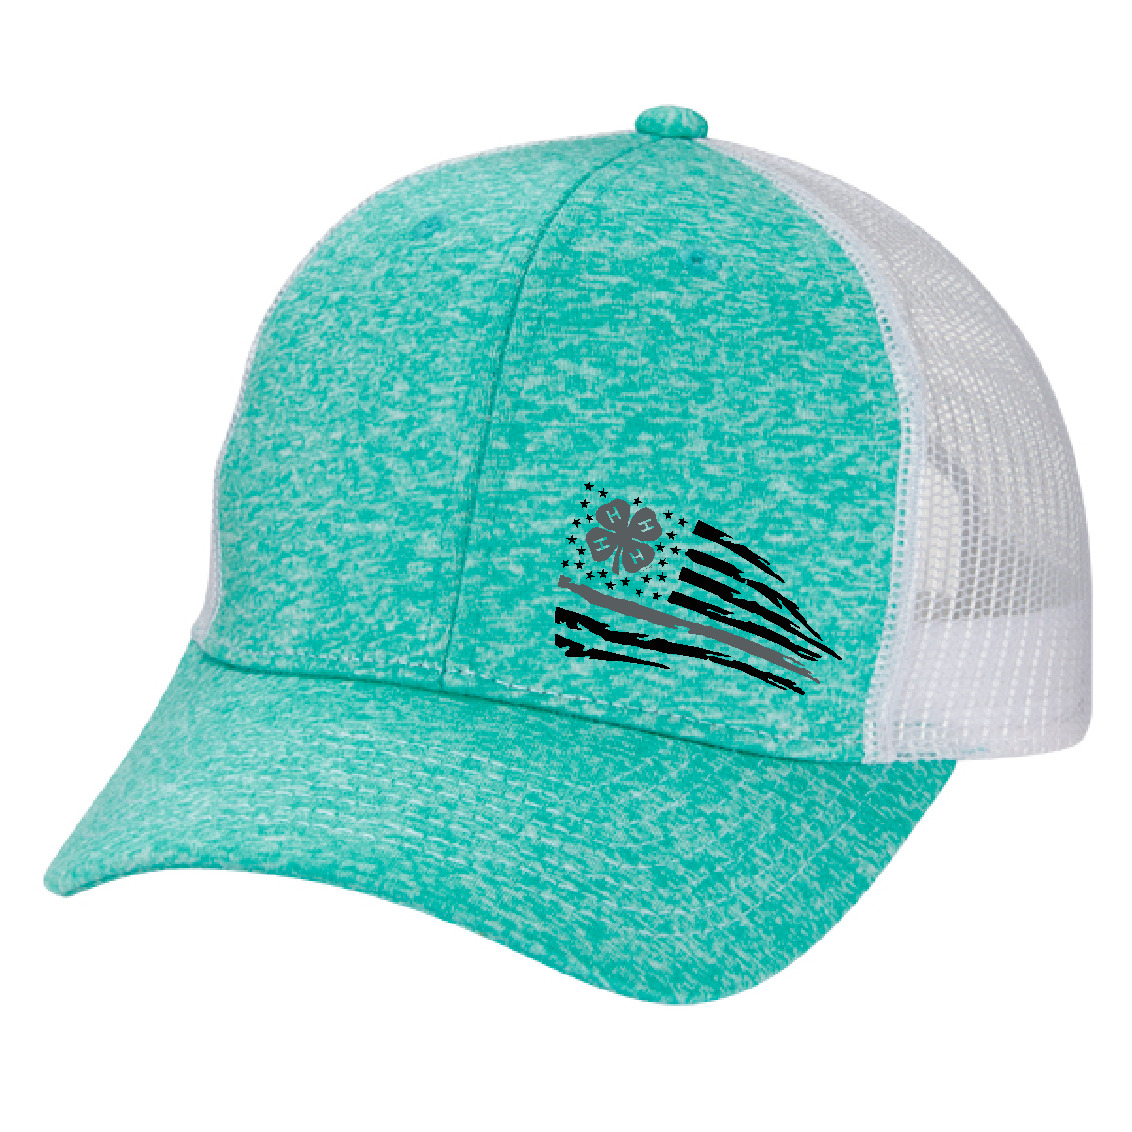 Teal_Cap_with_black_flag_8-17-21